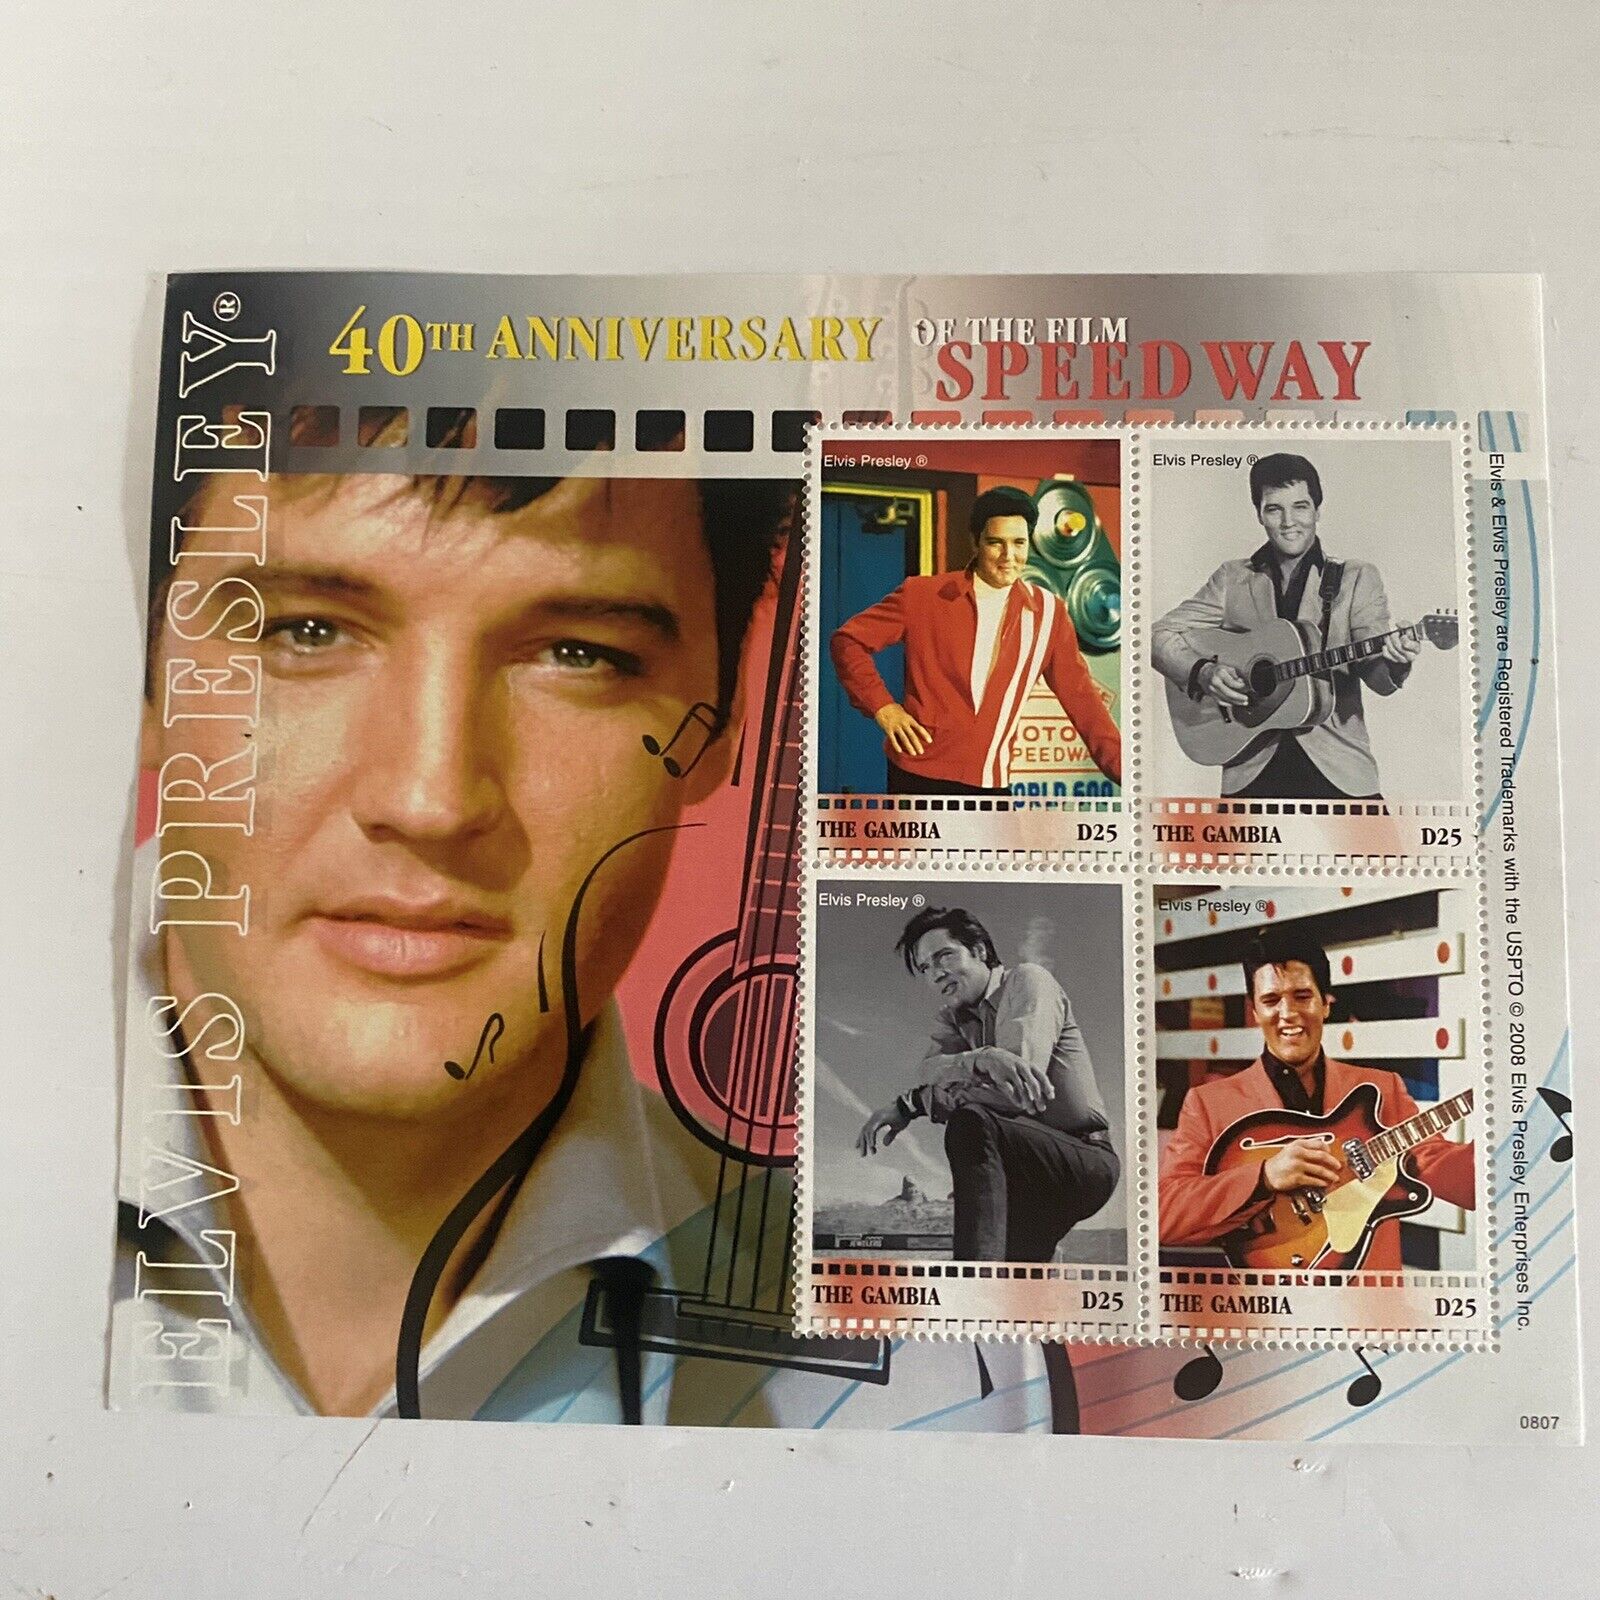 Lot of 3 Elvis Presley Stamps Collection Mystic Stamp (A) Без бренда - фотография #4